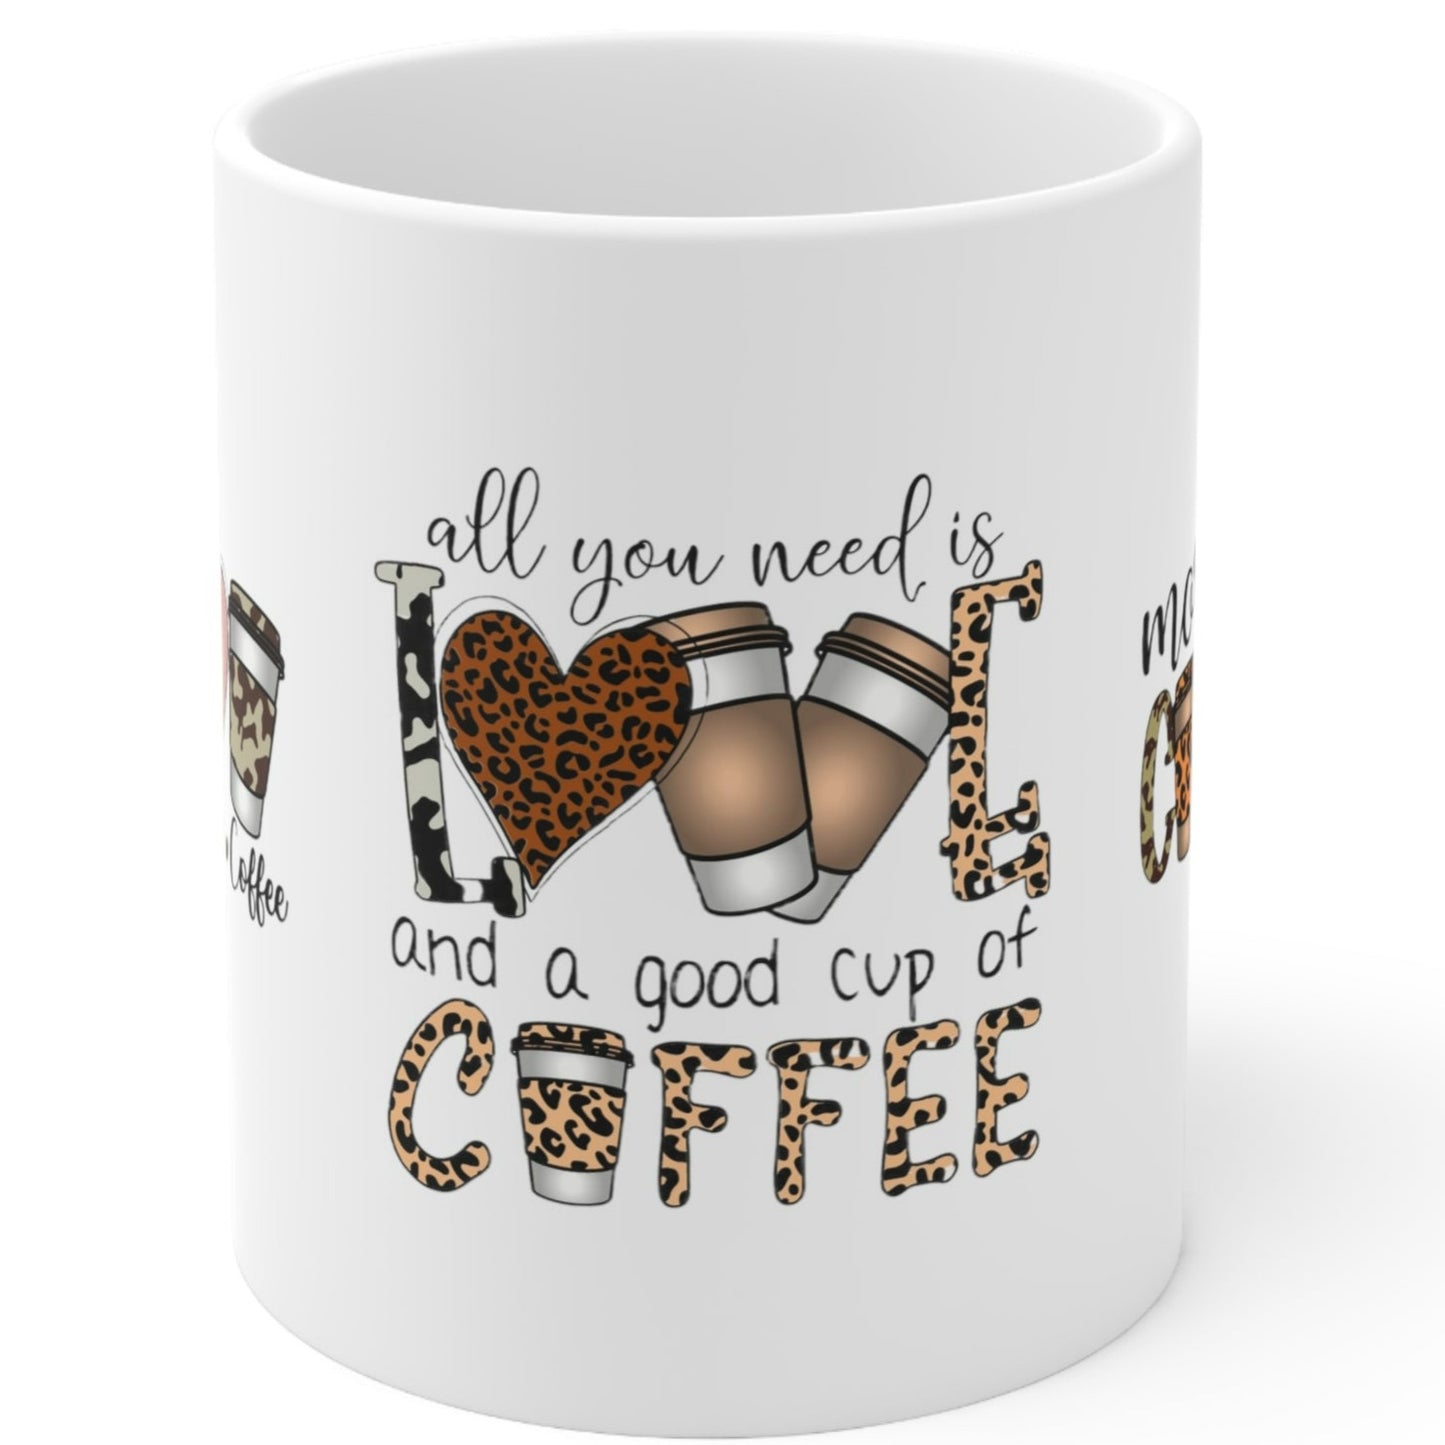 COFFEE LOVERS OFFICIAL MUG - Special Edition Three Messages in One Mug - MUGSCITY 23 - Free Shipping